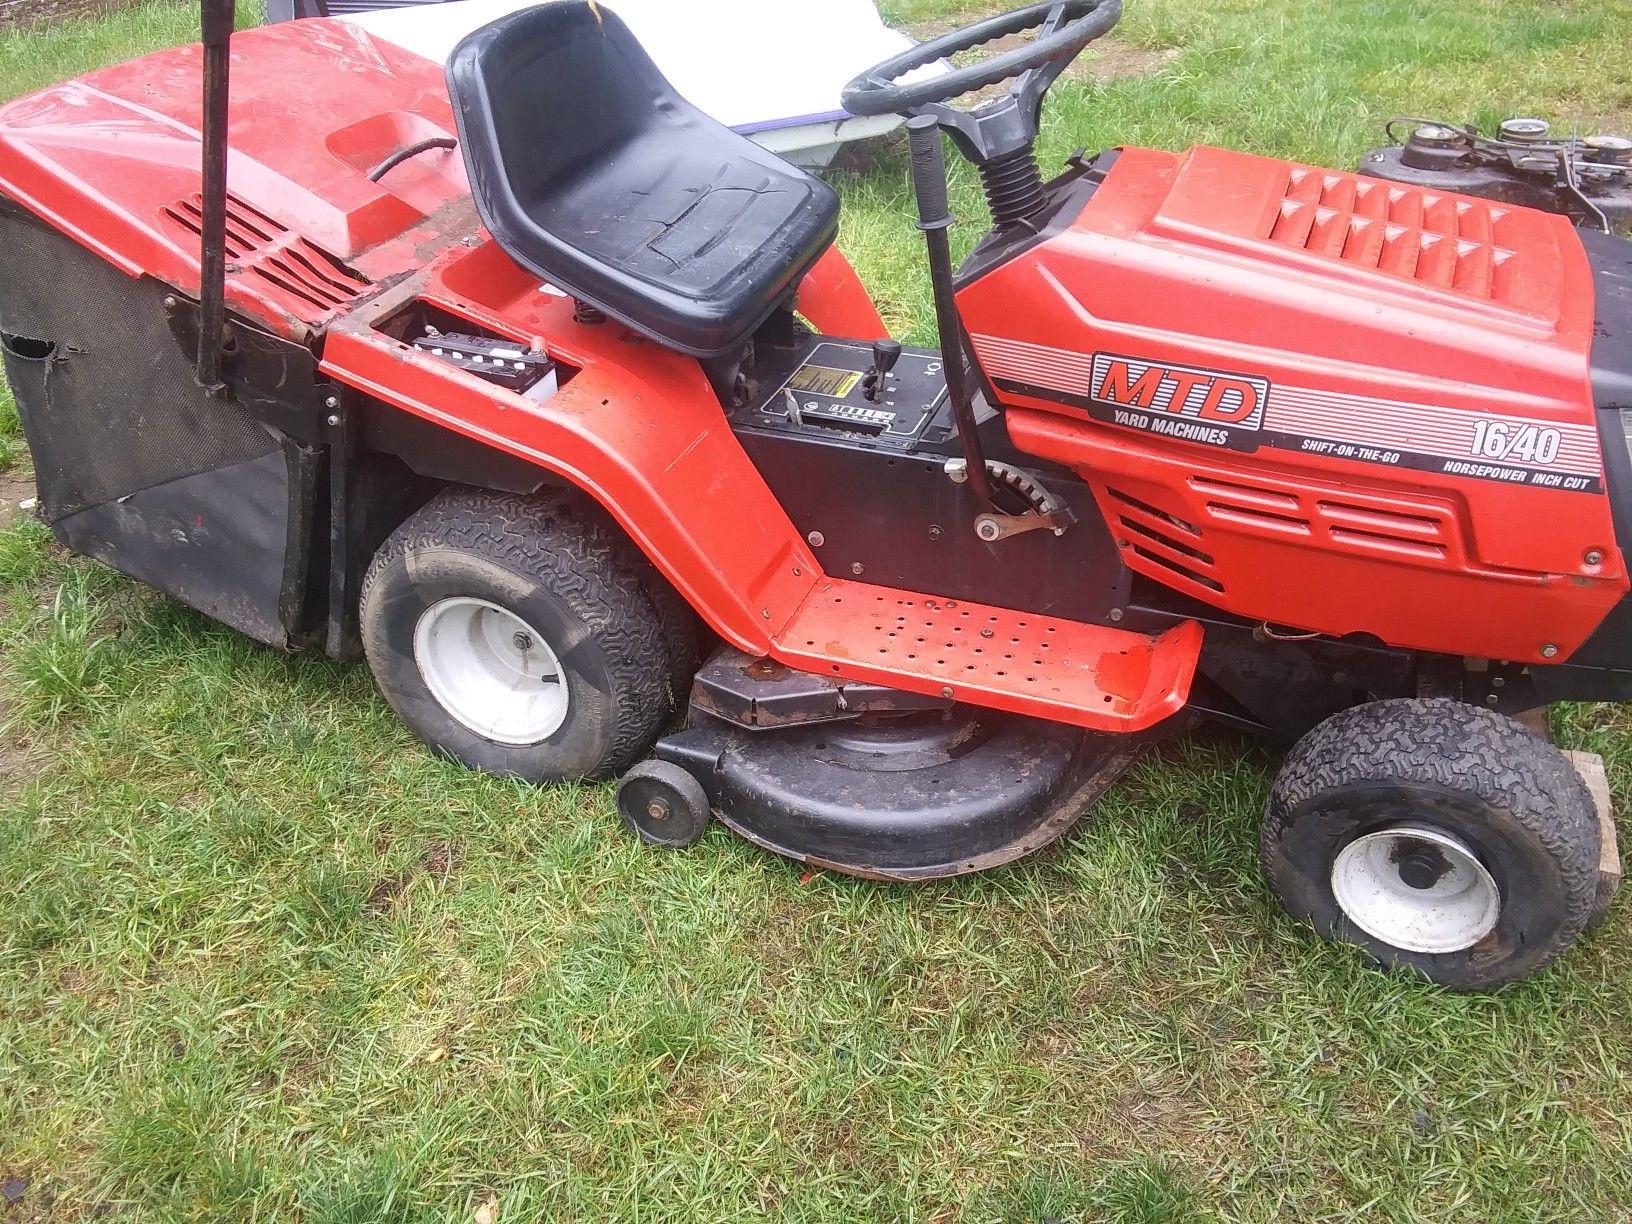 Mtd riding lawn mower with rear shoot bagger